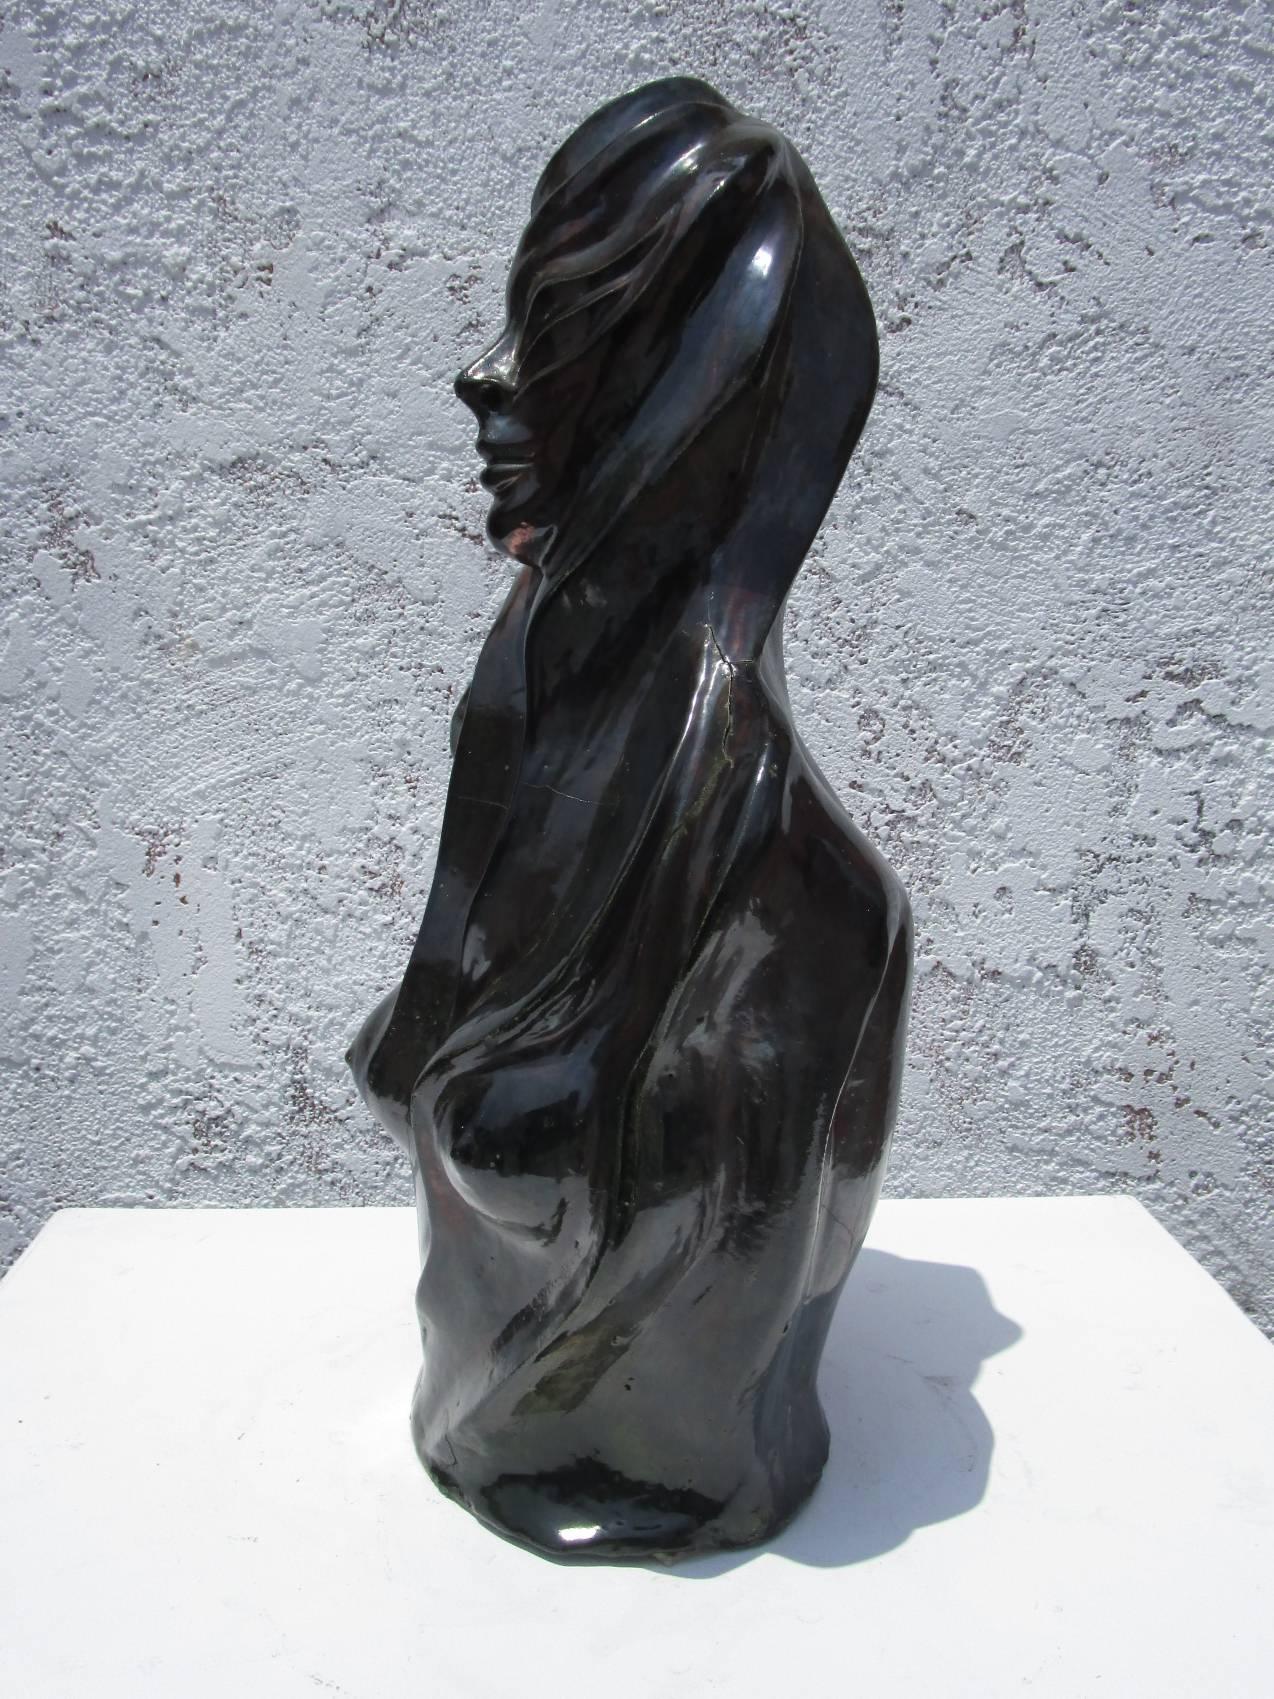 This ceramic sculpture of a nude female figure is built with angular features and a dark almost black glaze with incredible dark greens / reds / browns reflects. The depiction of the hair indicates movement and the woman has a serene expression. The